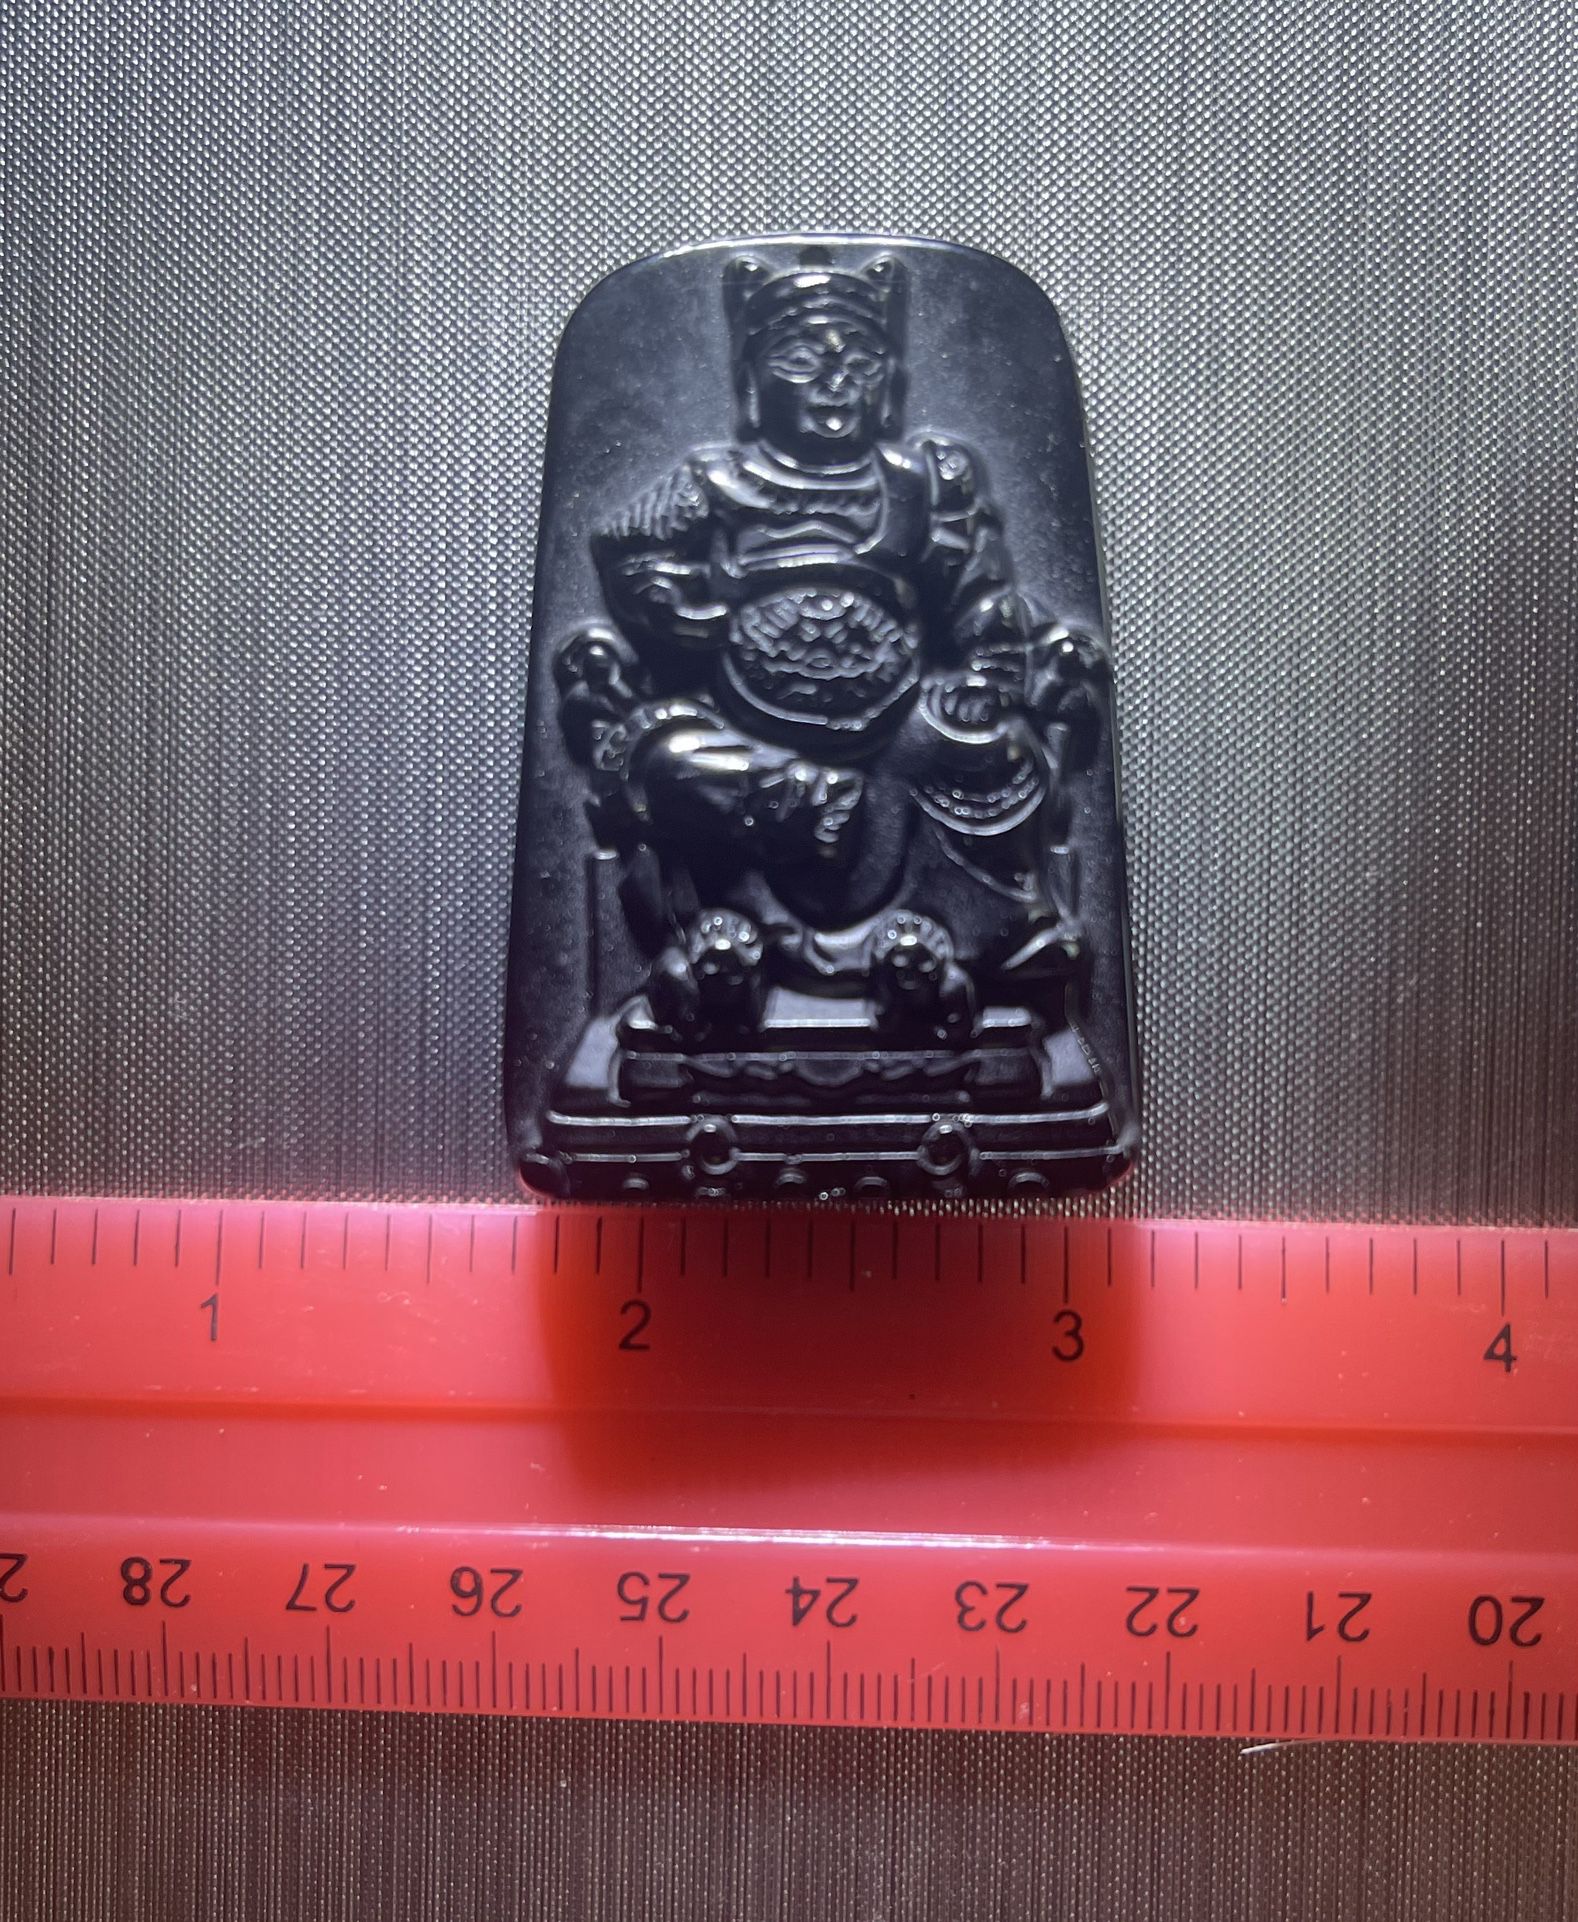 Chinese Square Carving, Good Luck Charm. Can Be Diy’d To Pendant